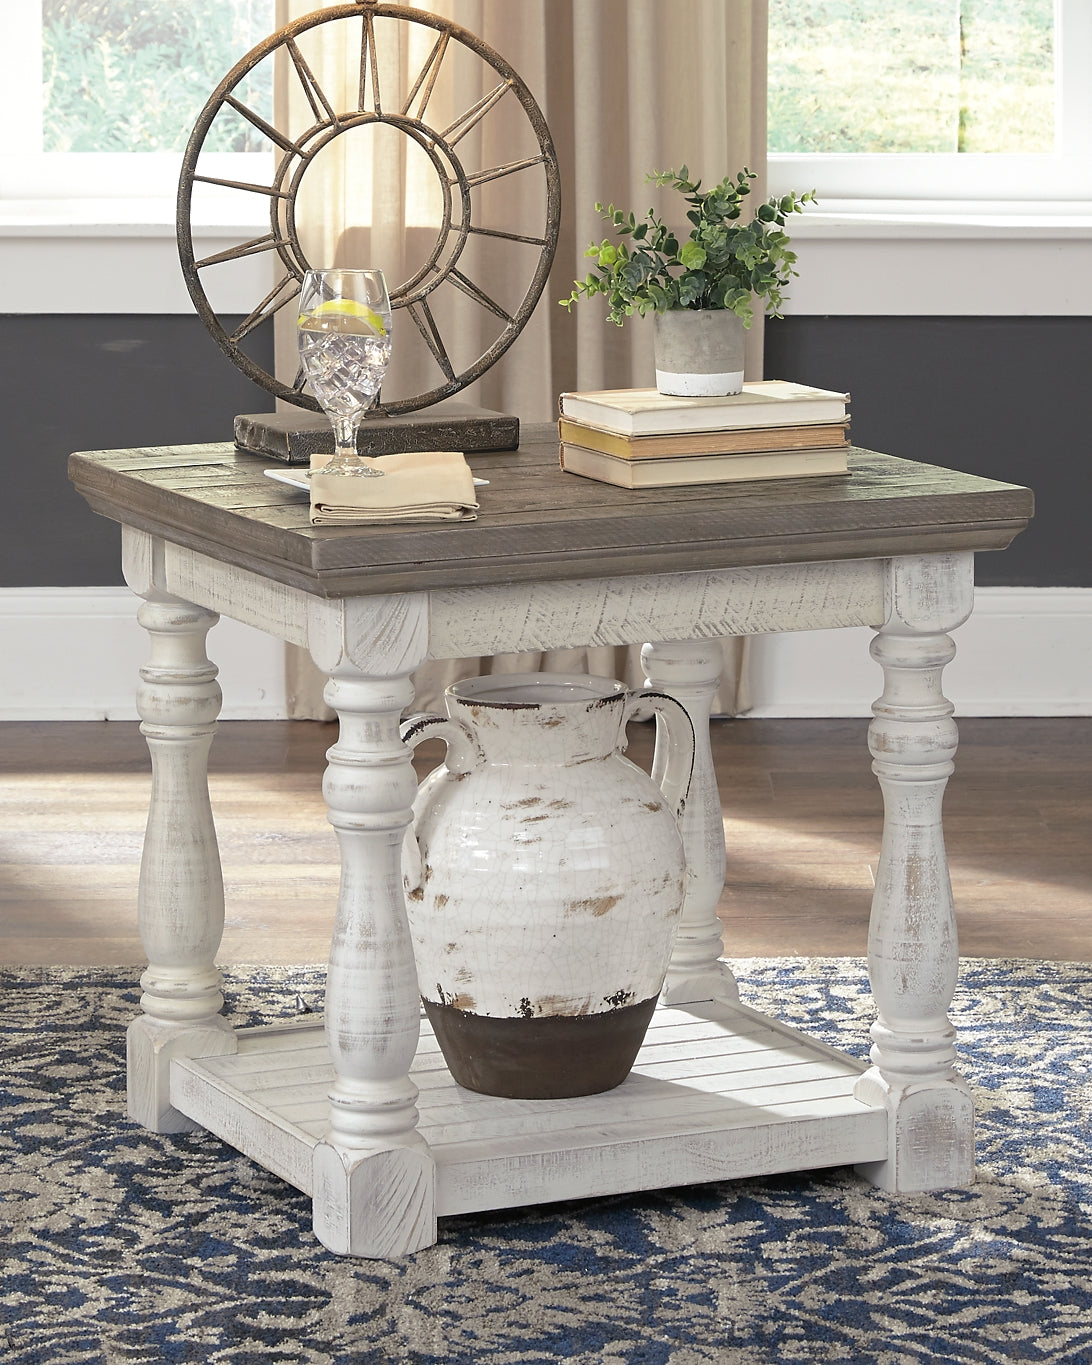 Havalance Coffee Table with 1 End Table JB's Furniture  Home Furniture, Home Decor, Furniture Store